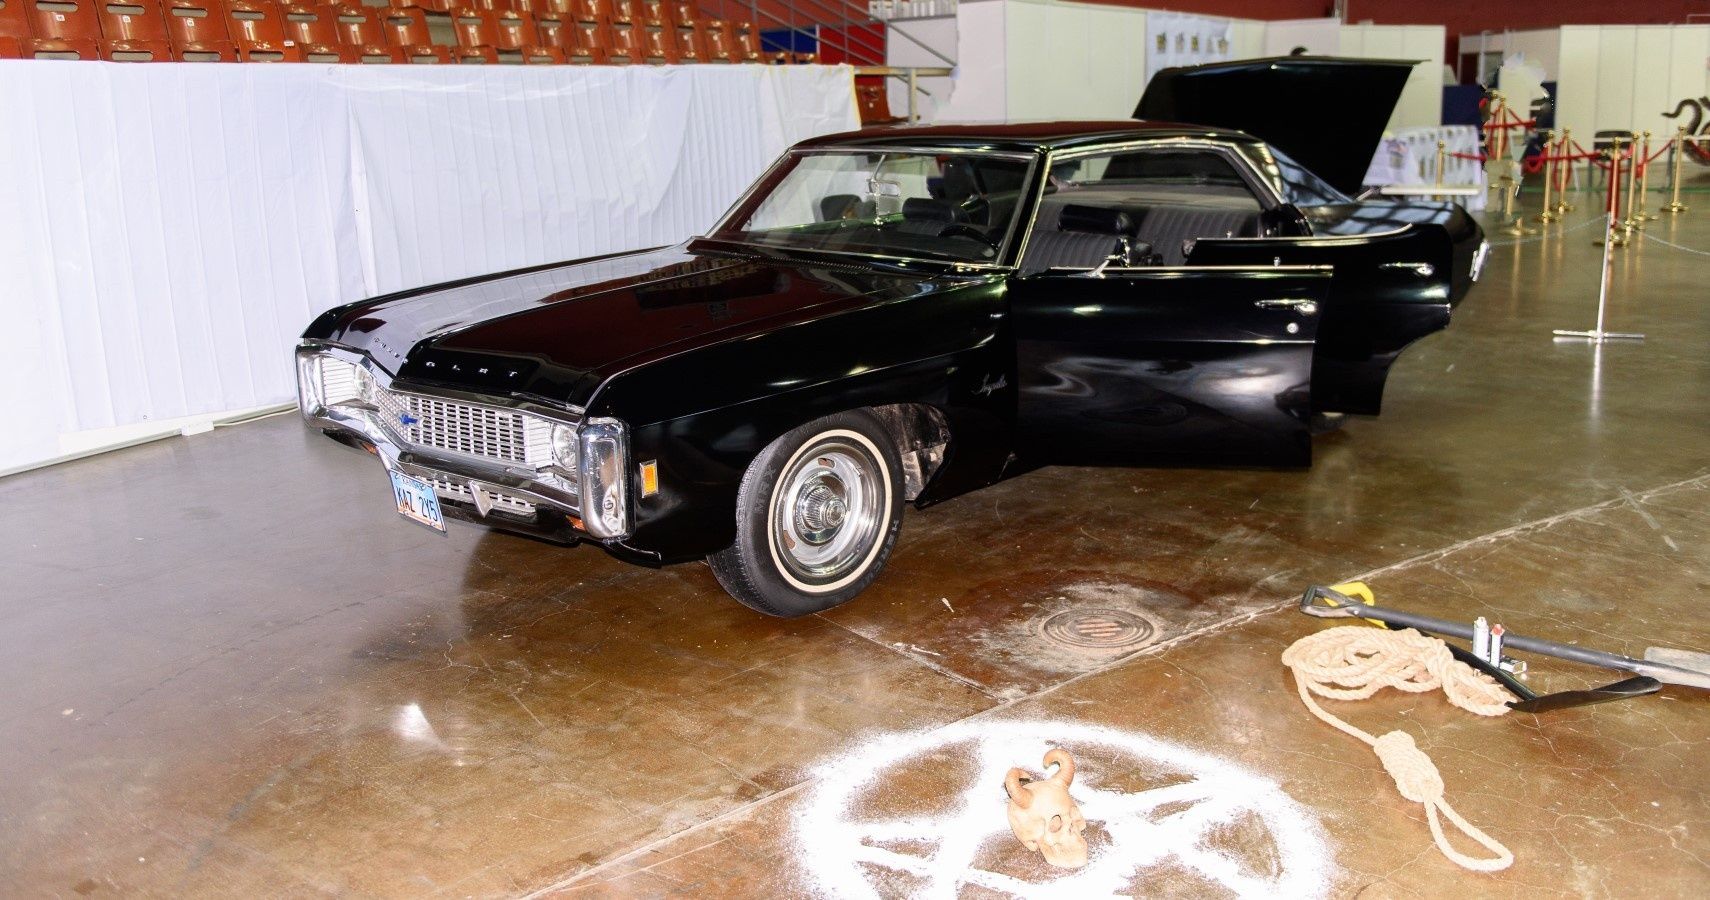 Black 1967 Chevrolet Impala from Supernatural front third quarter view